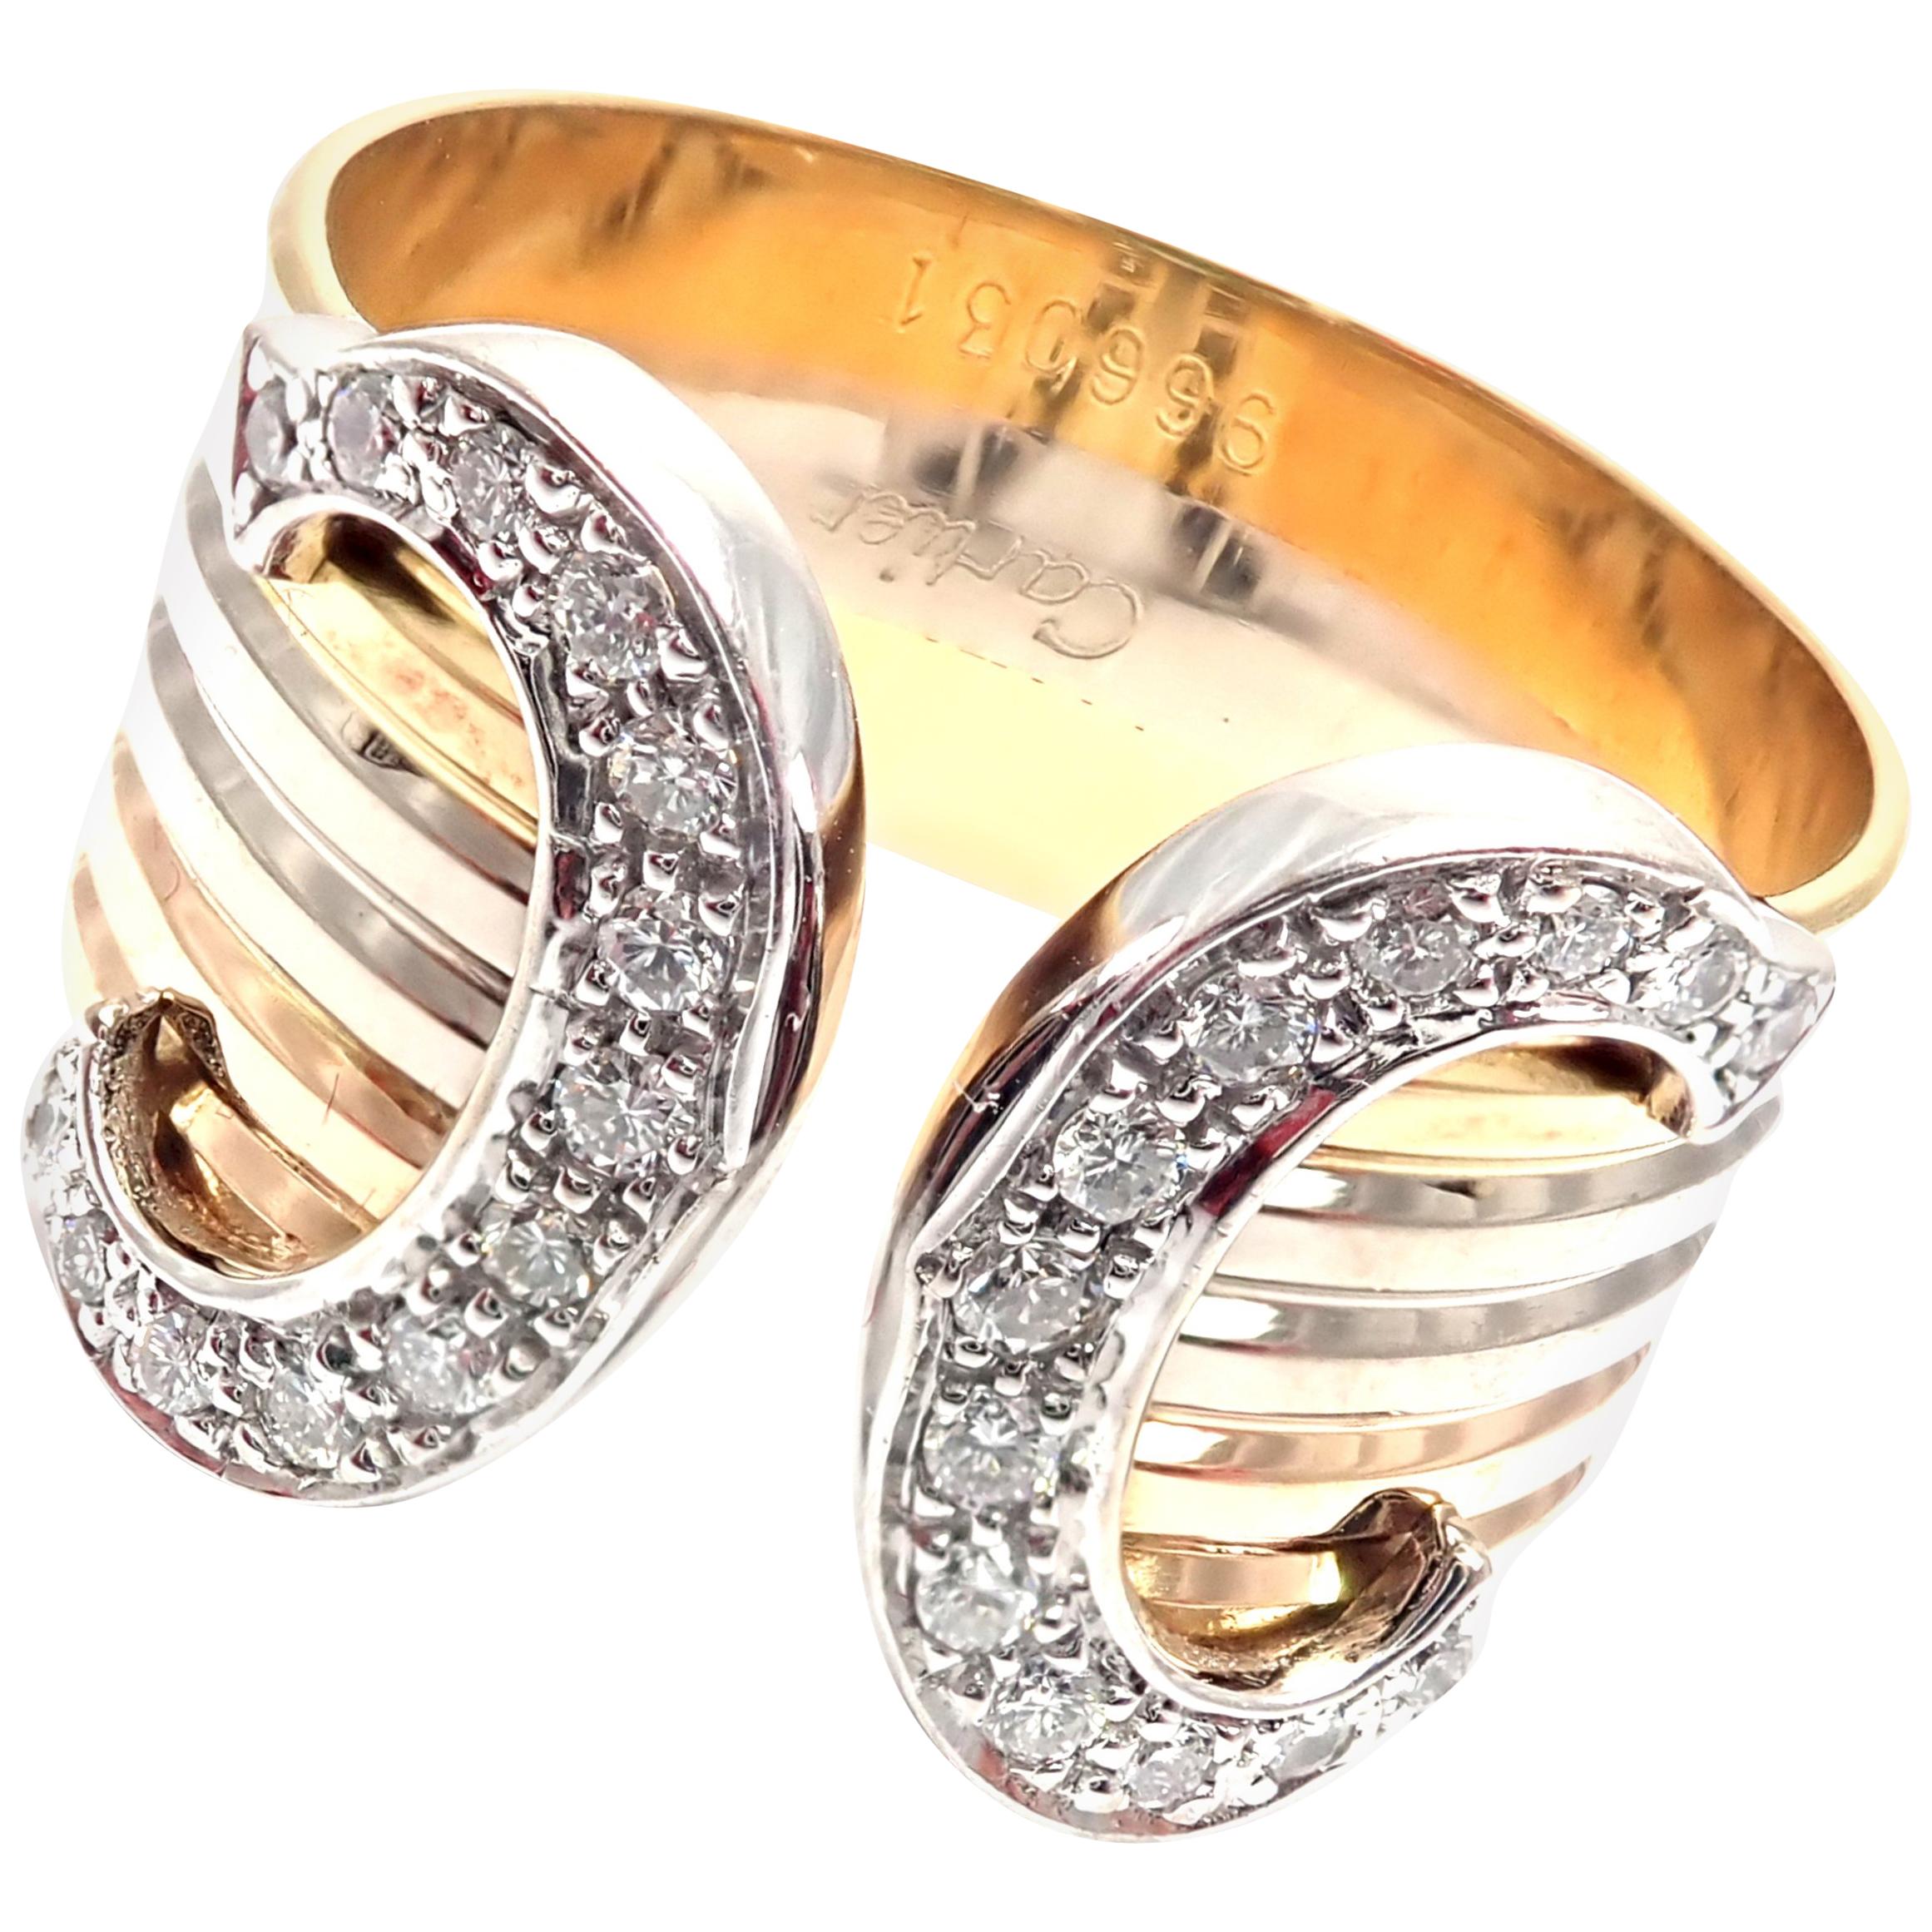 Cartier Double C Diamond Tri-color Gold Band Ring